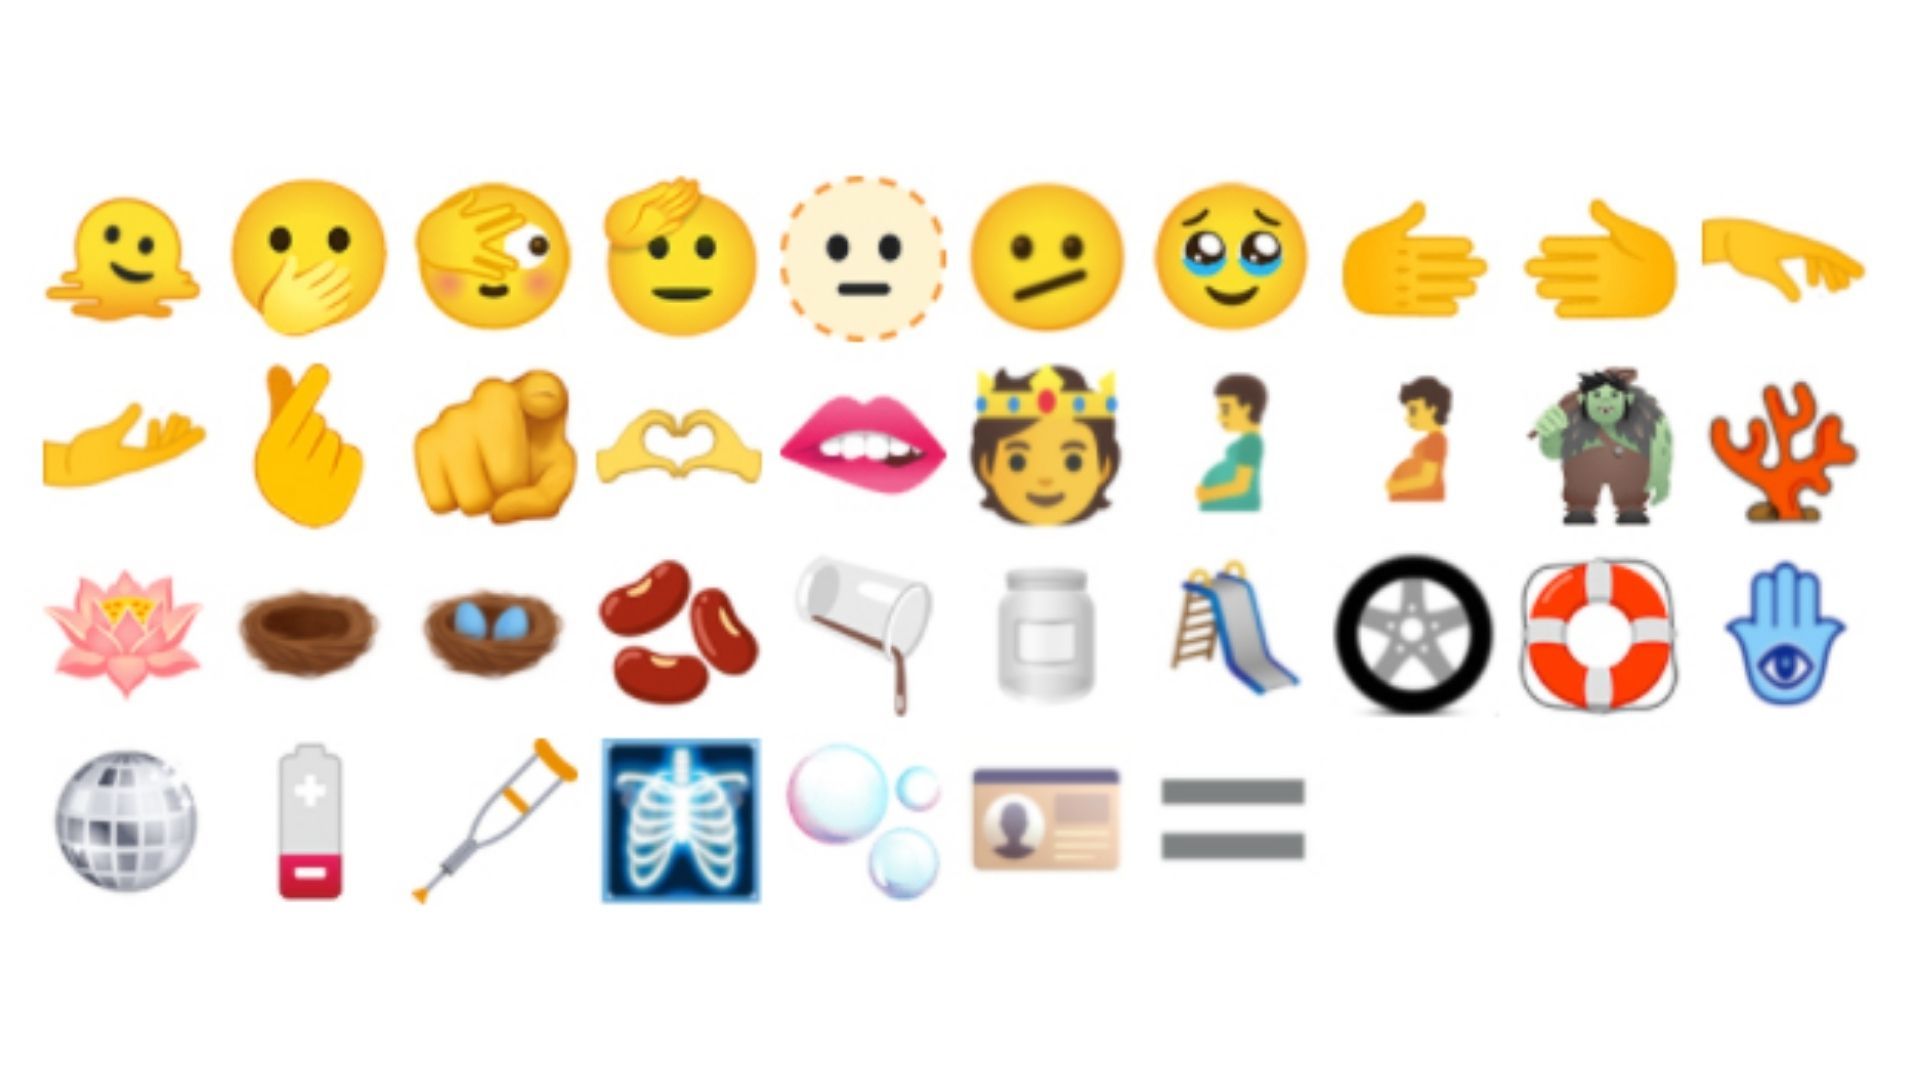 See All 37 New Emoji Available to You Now in Apple's iOS 15.4 Update